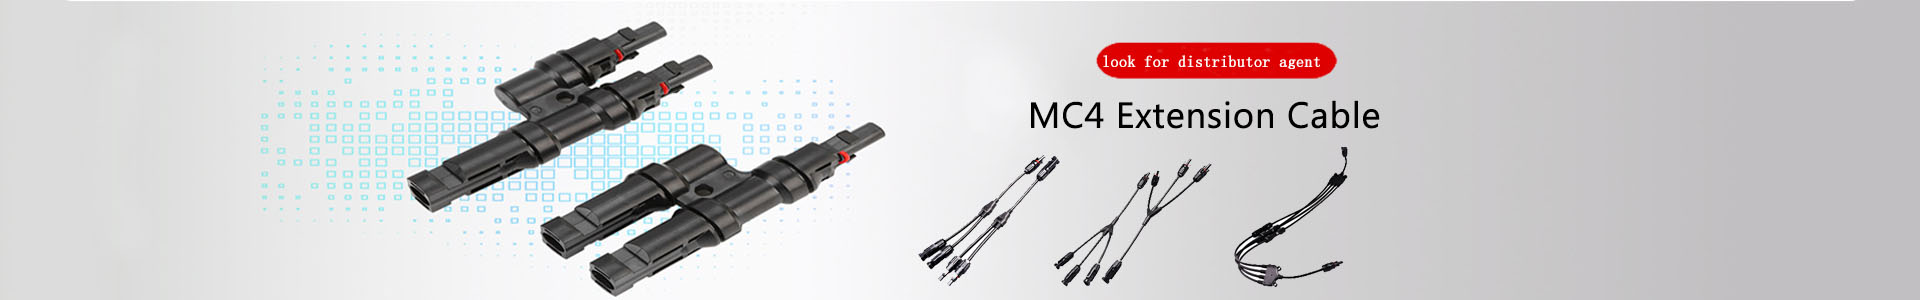 Solar PV System project-Solar | solar connector,solar branch connector,diode fuse connector,MC4 extnsion cable,H1Z2Z2 solar cable, UL4703 solar cable | Leading manufacturer and supplier of solar pv cables and connectors